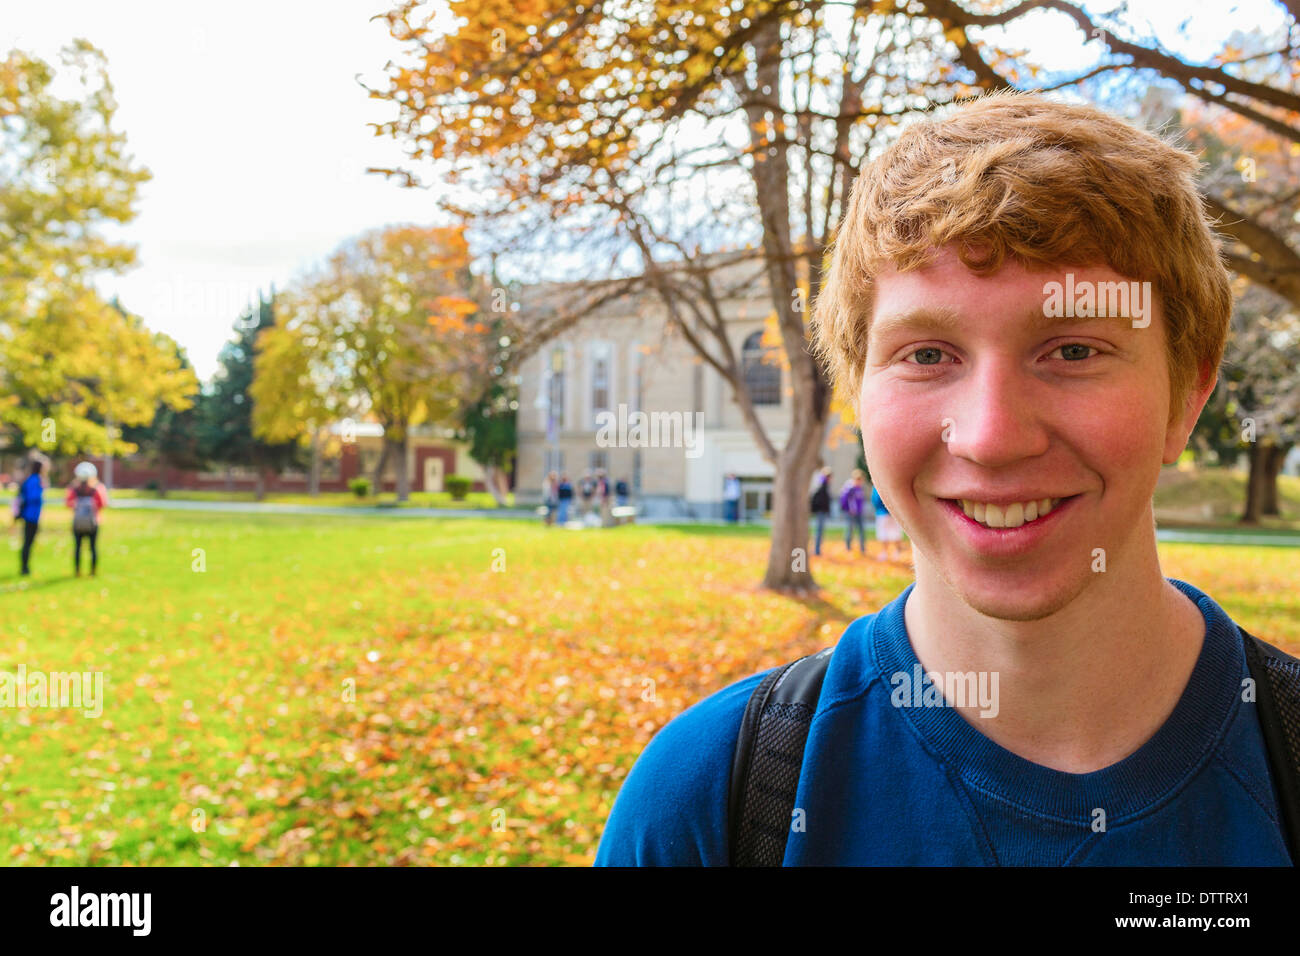 Student smiling on campus Stock Photo